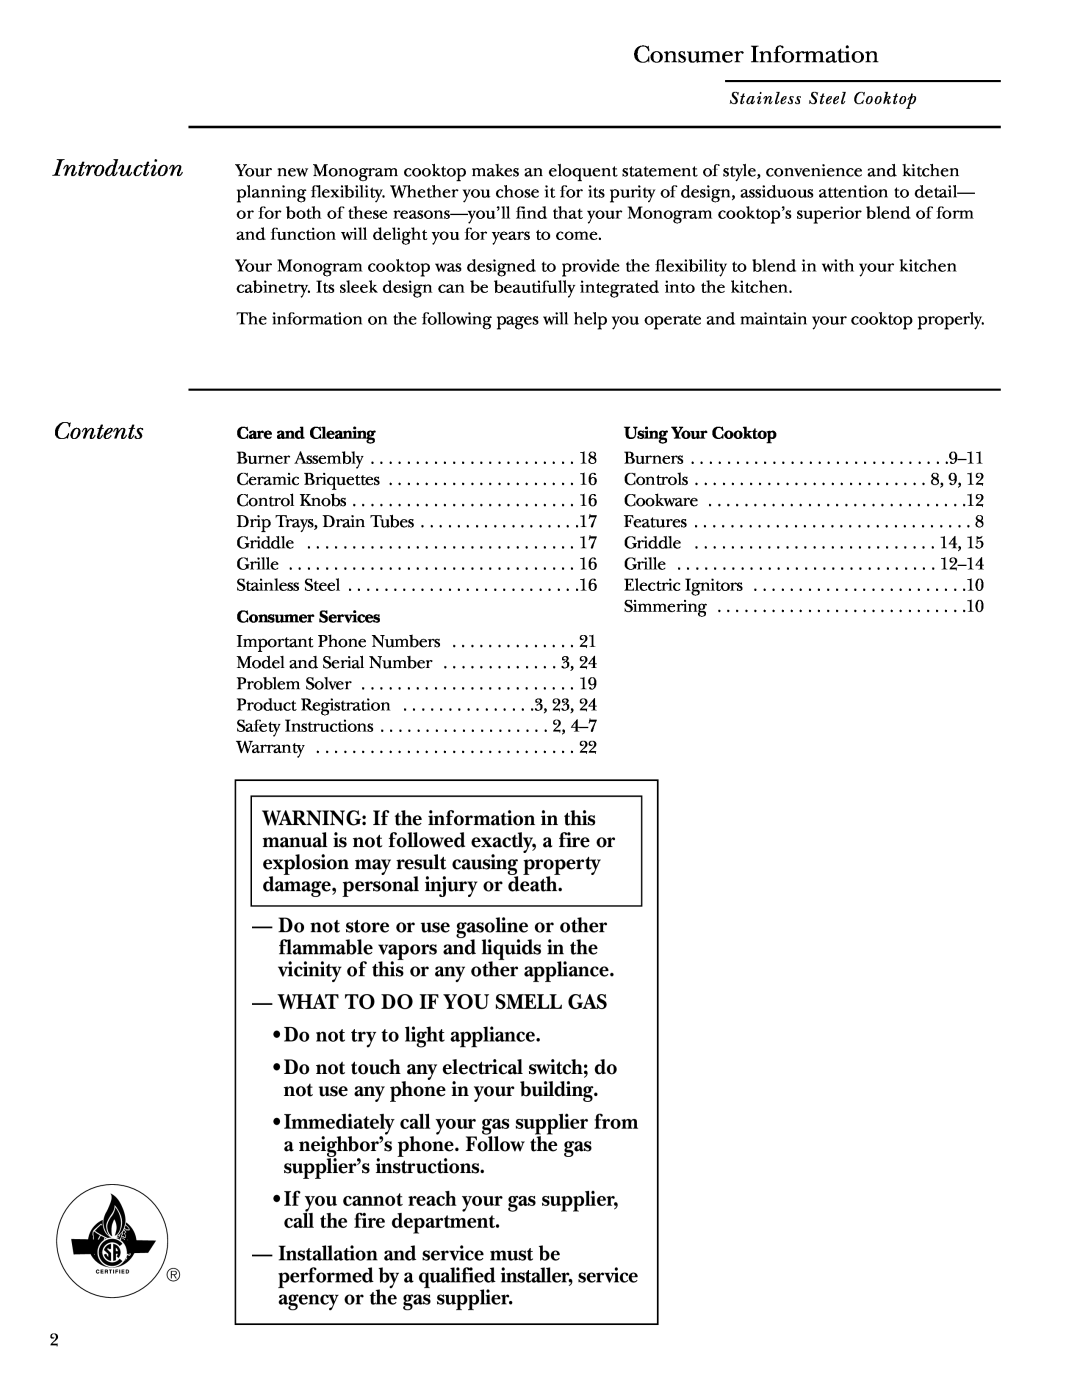 GE 36 owner manual Consumer Information, Introduction, Contents 